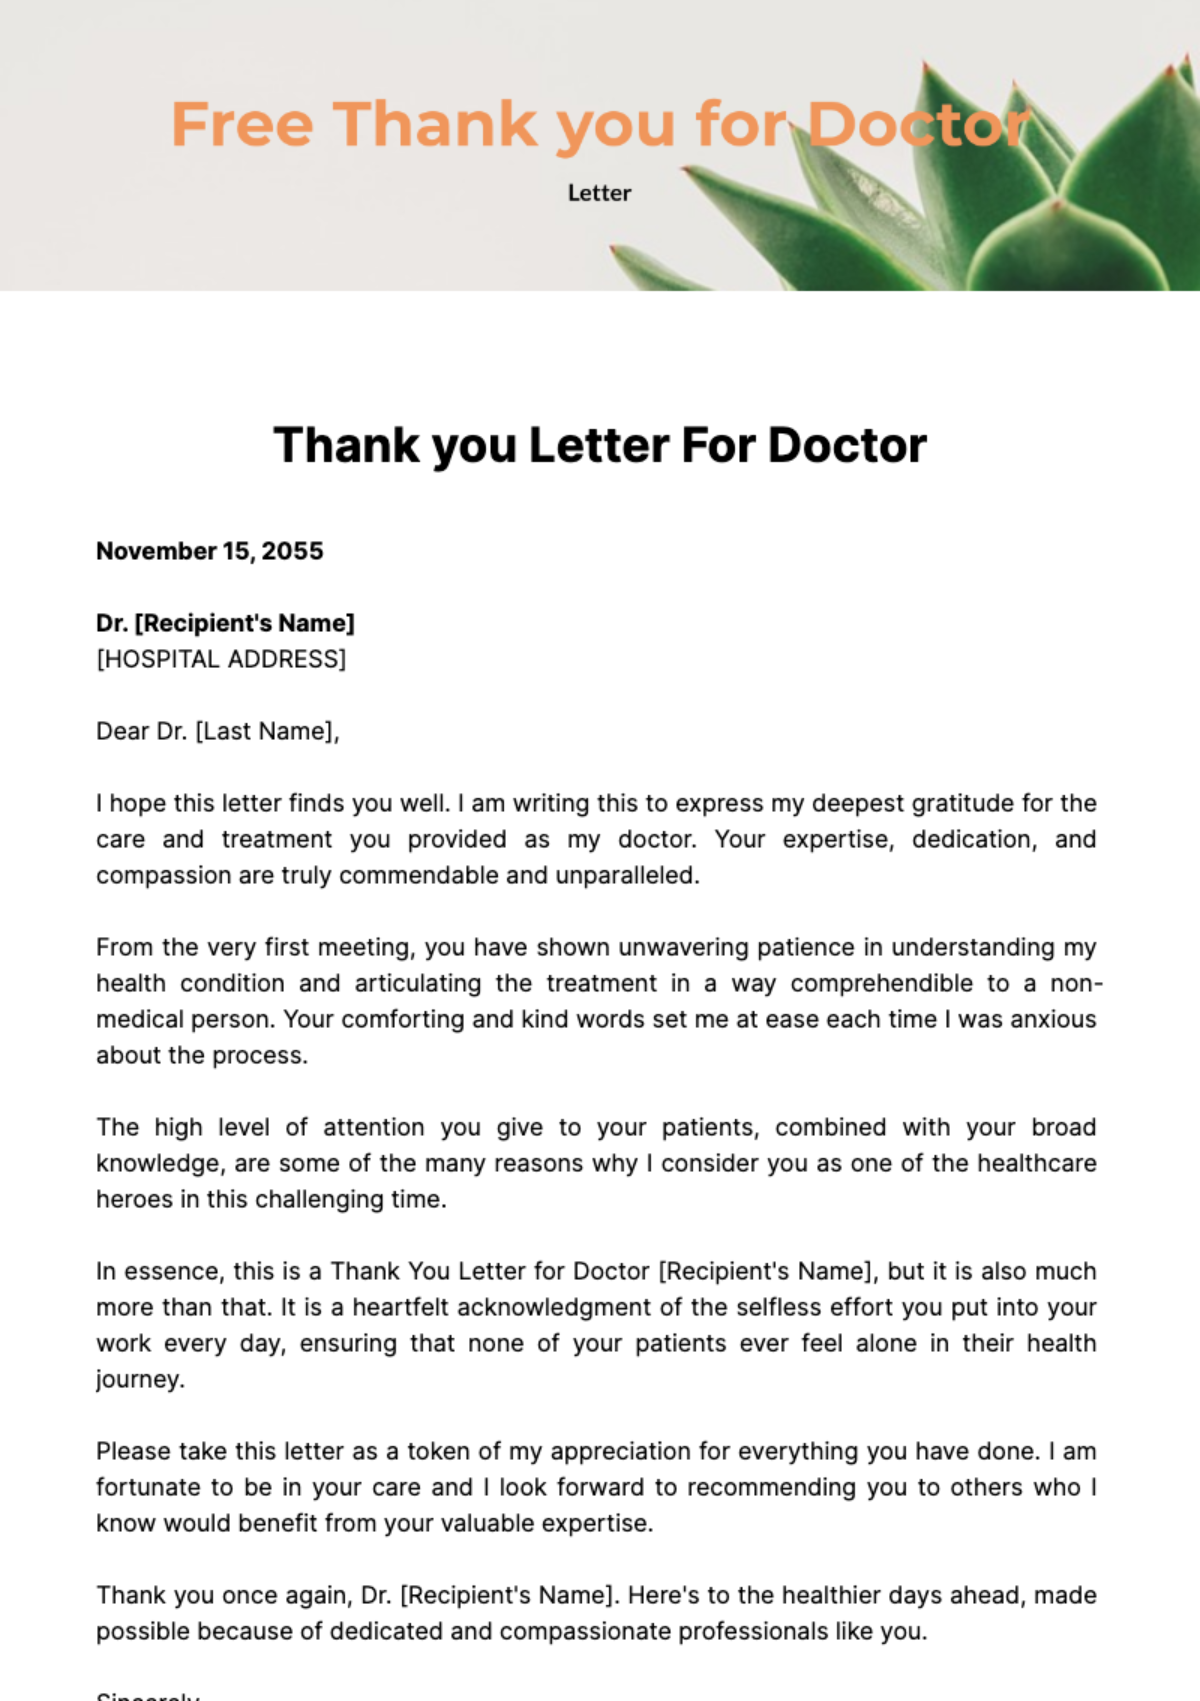 Free Thank you Letter for Doctor Template